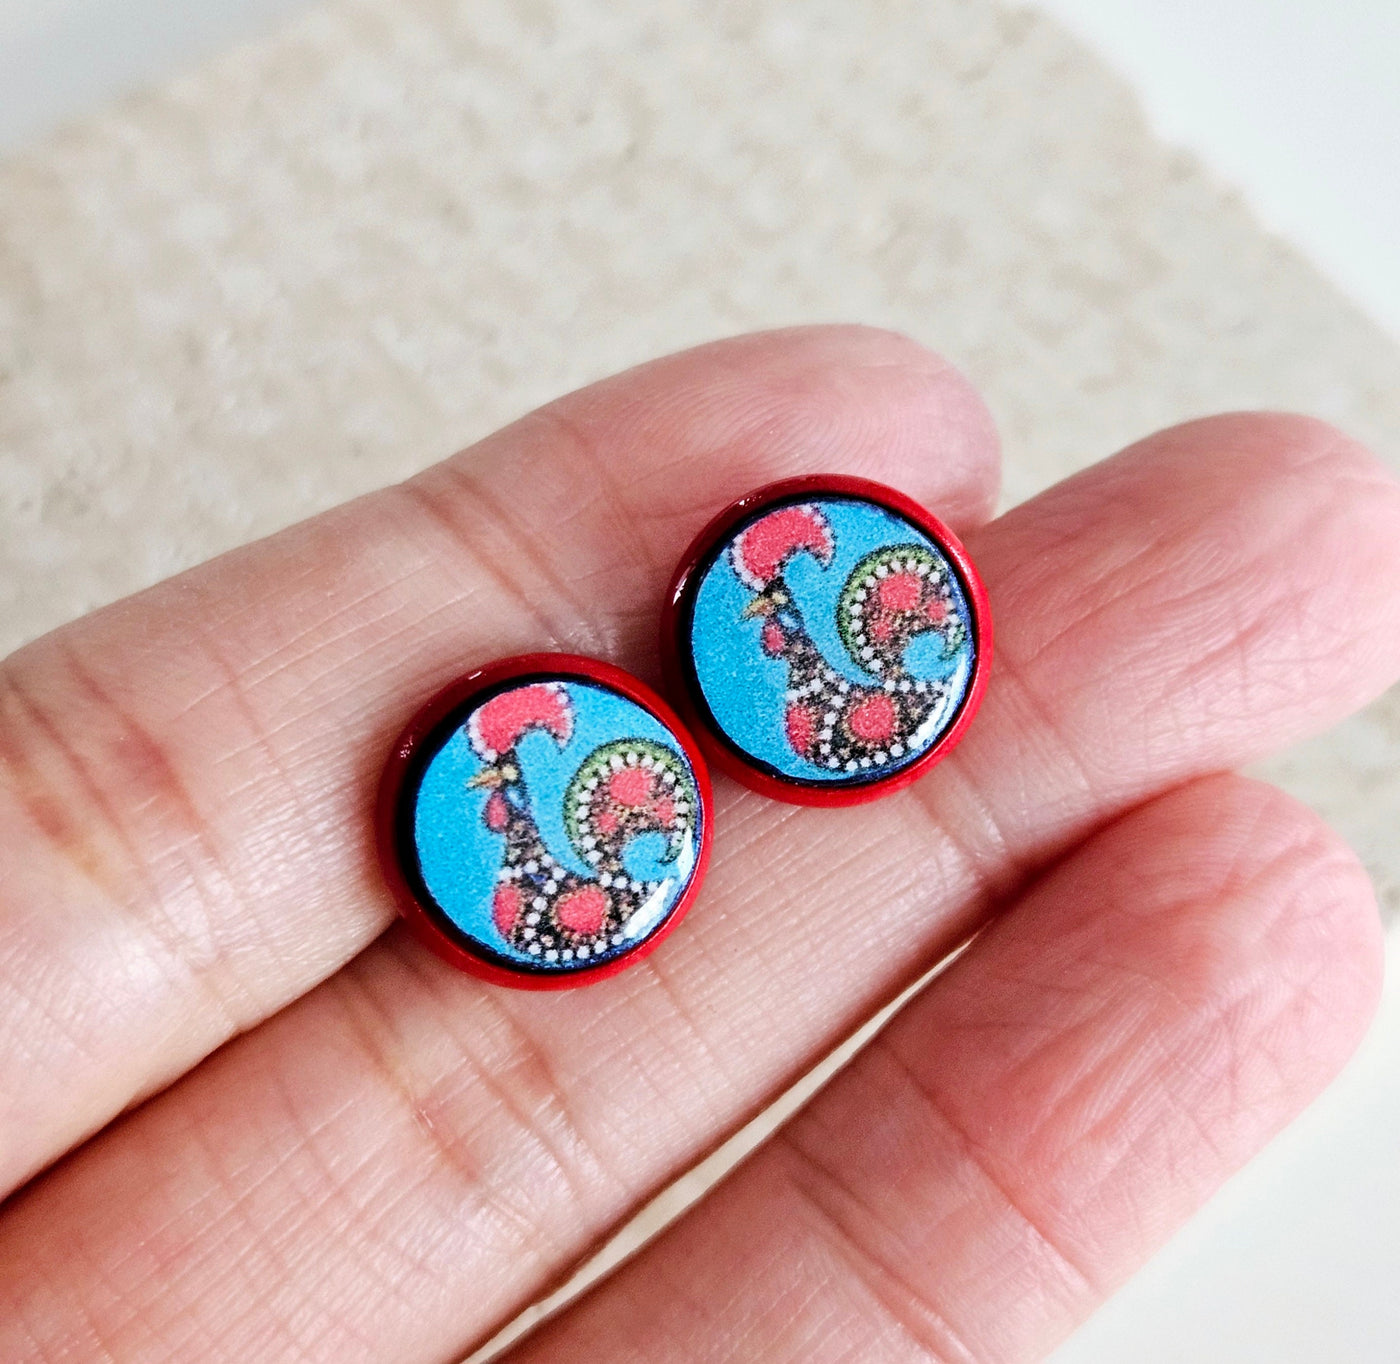 Turquoise Red Rooster Red Post Stud Earring Barcelos Rooster Portuguese Heritage Galo Folklore Round Earring Handmade Birthday Gift for Her